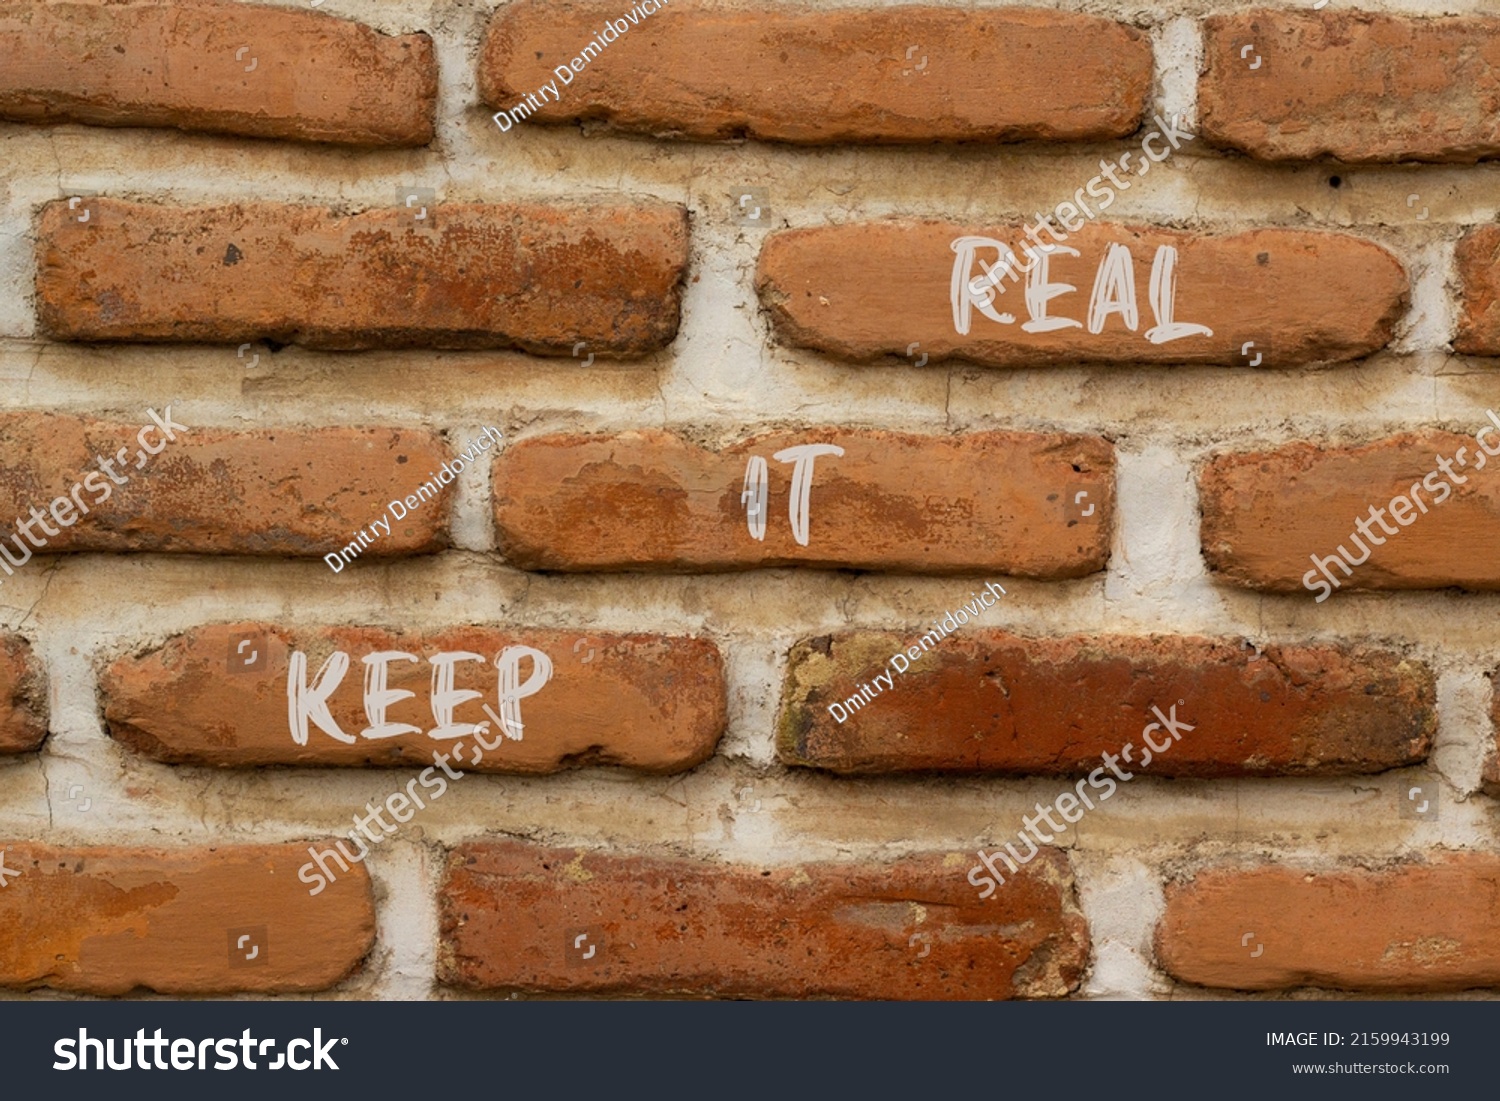 Keep it real and support symbol. Concept words Keep it real on brick wall. Beautiful brick wall background. Business and support Keep it real quote concept. Copy space. #2159943199